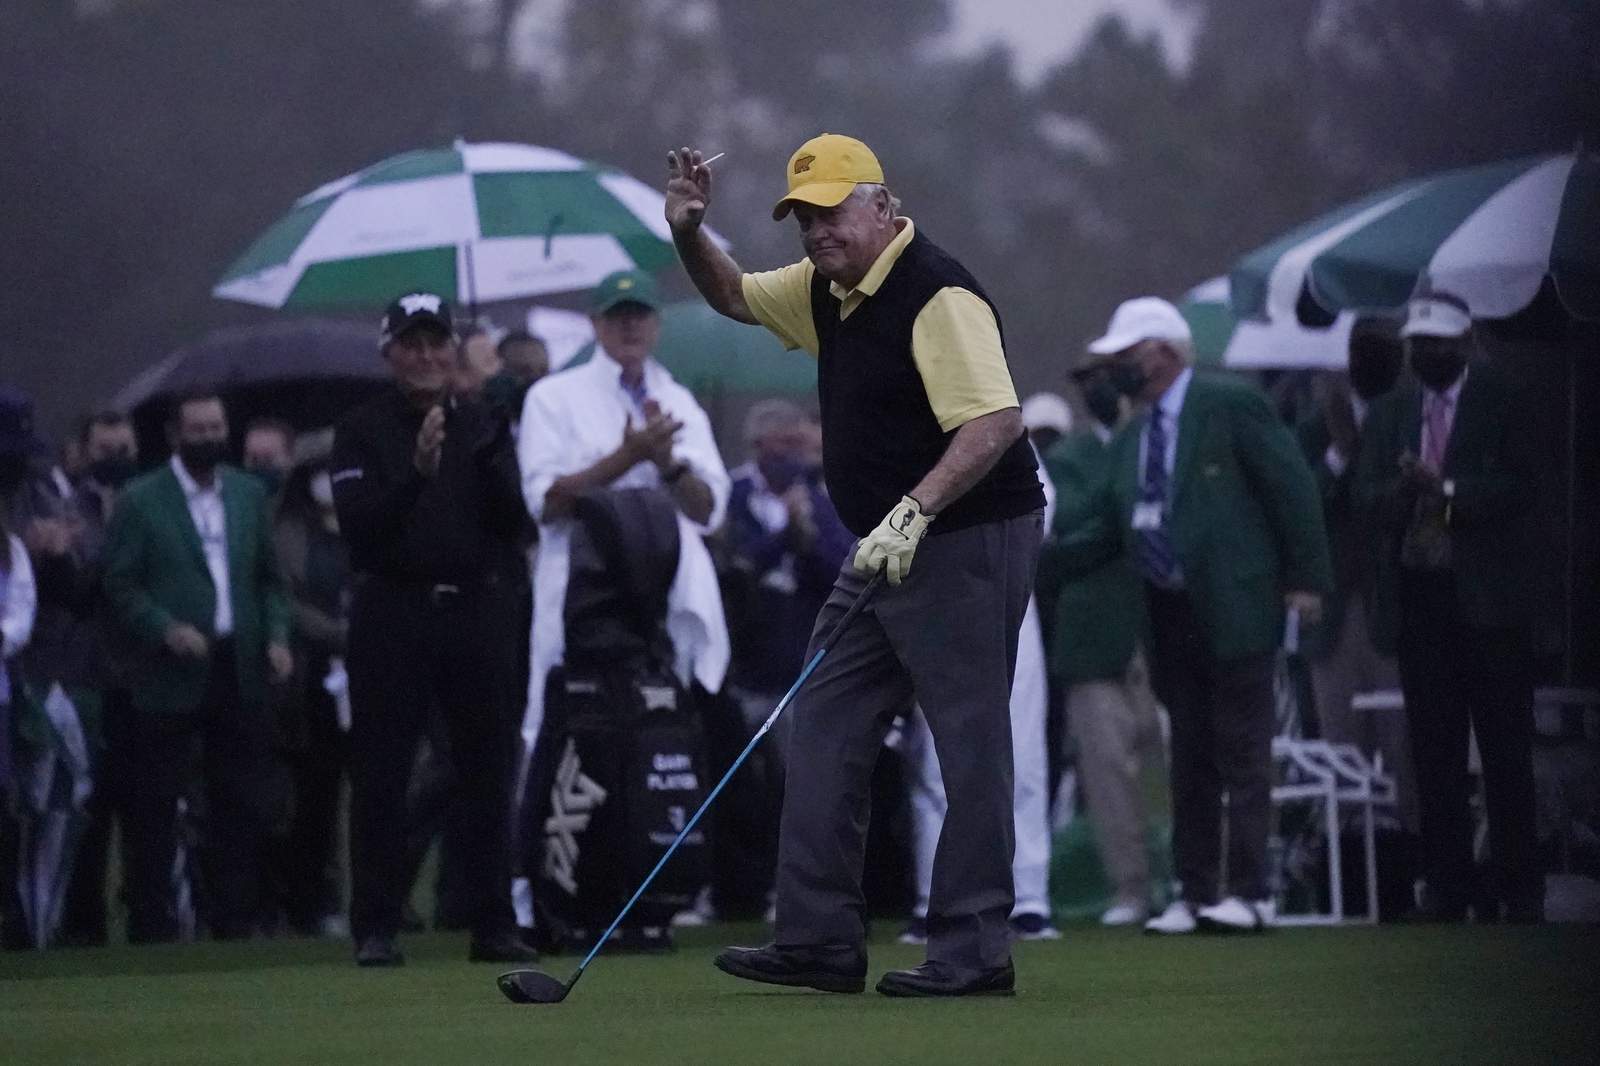 Honorary starters, then rain, as 1st fall Masters begins